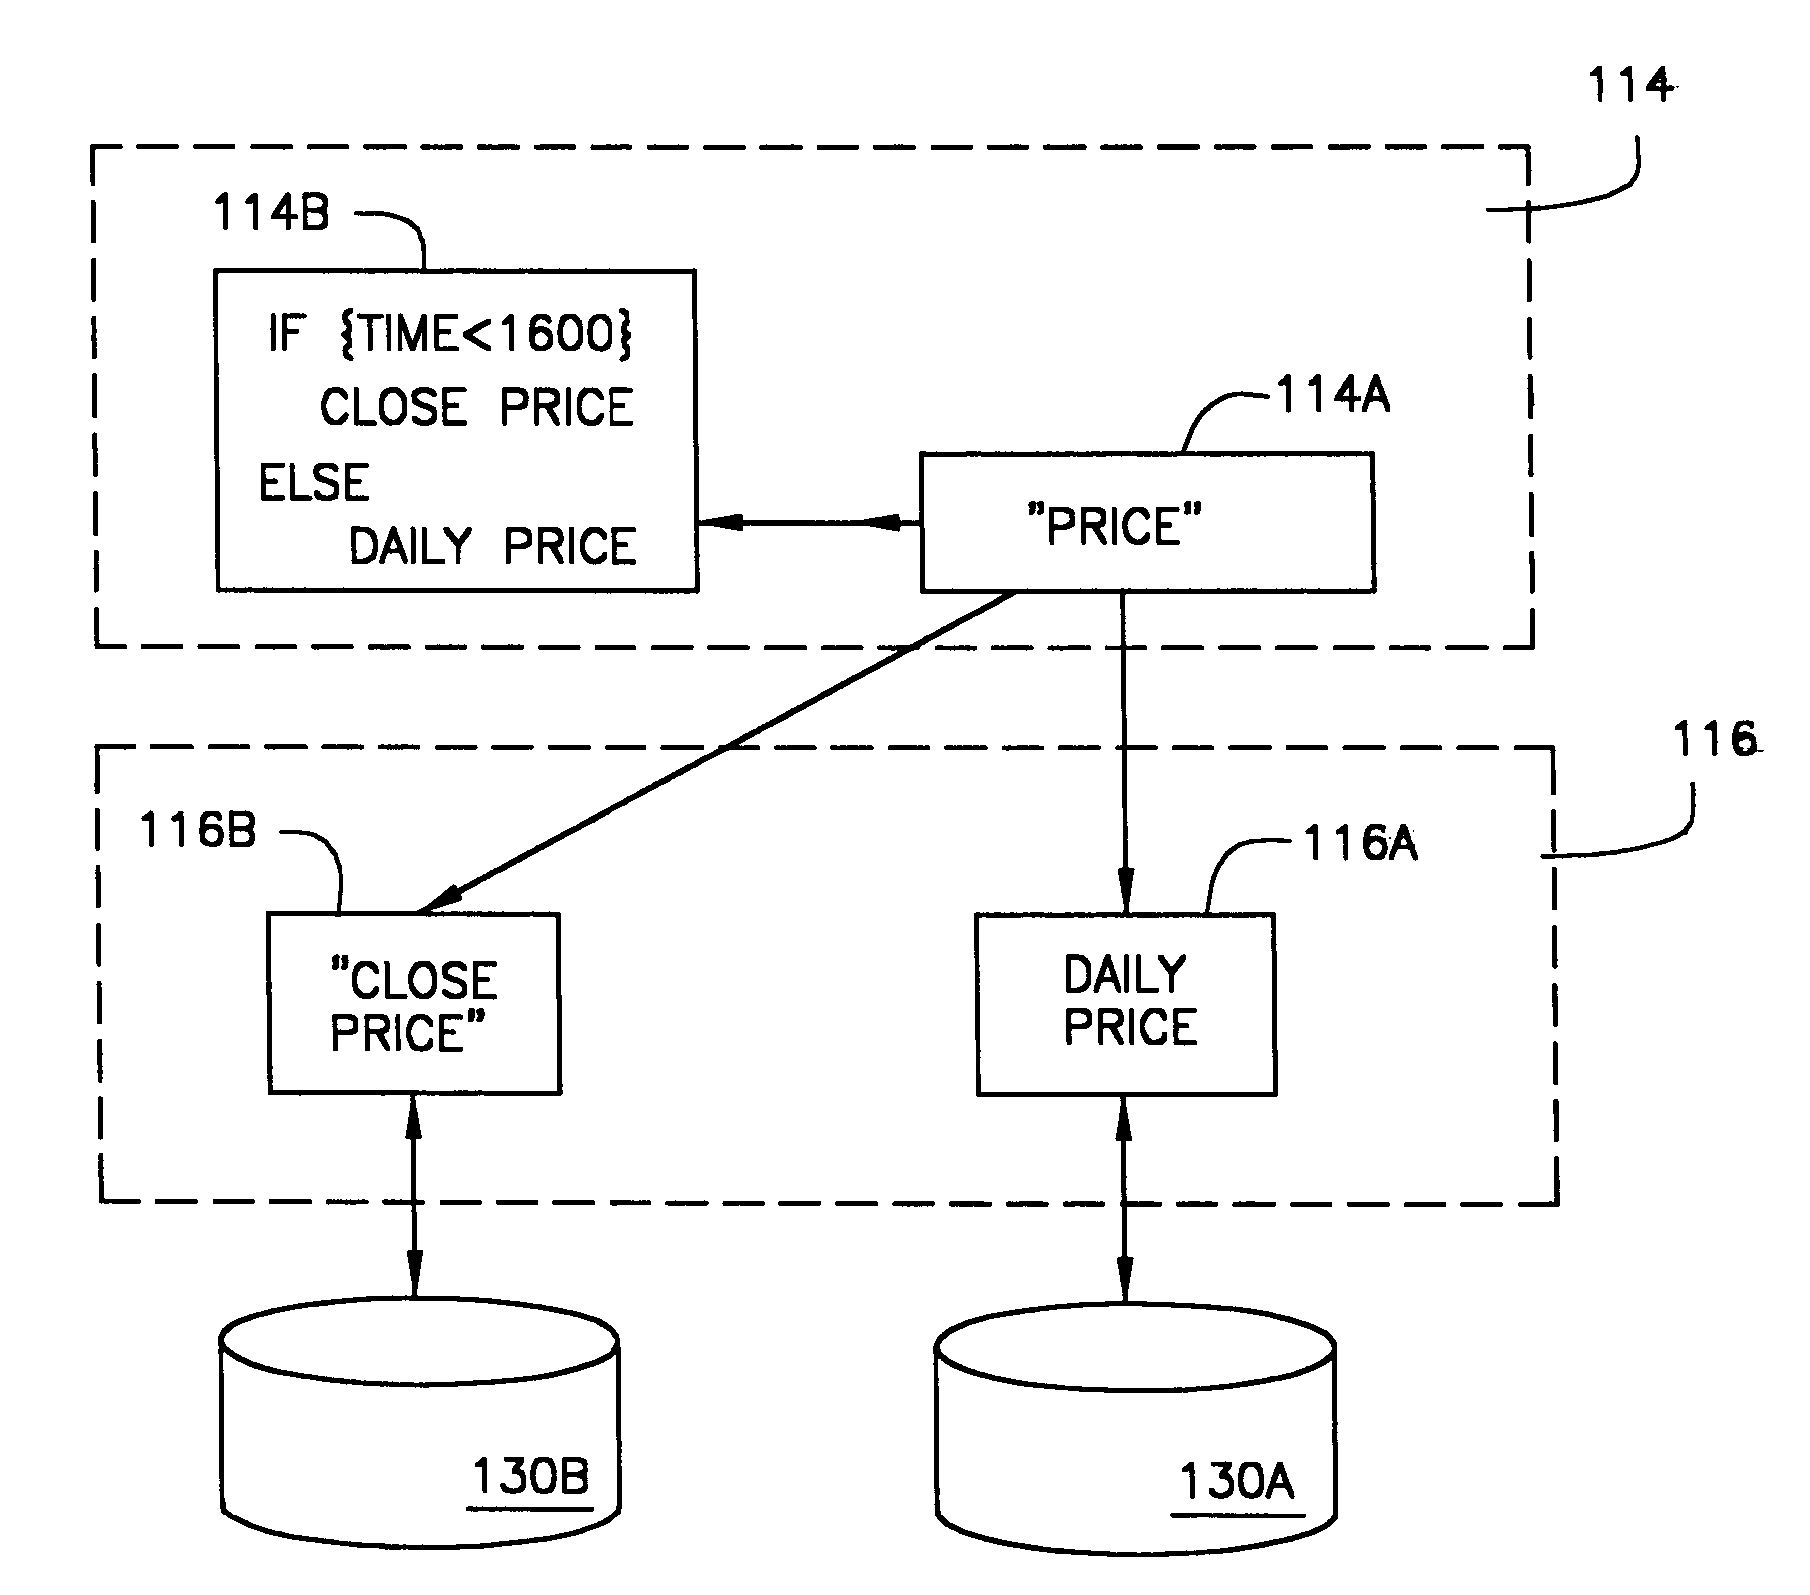 System and method for accessing data in disparate information sources